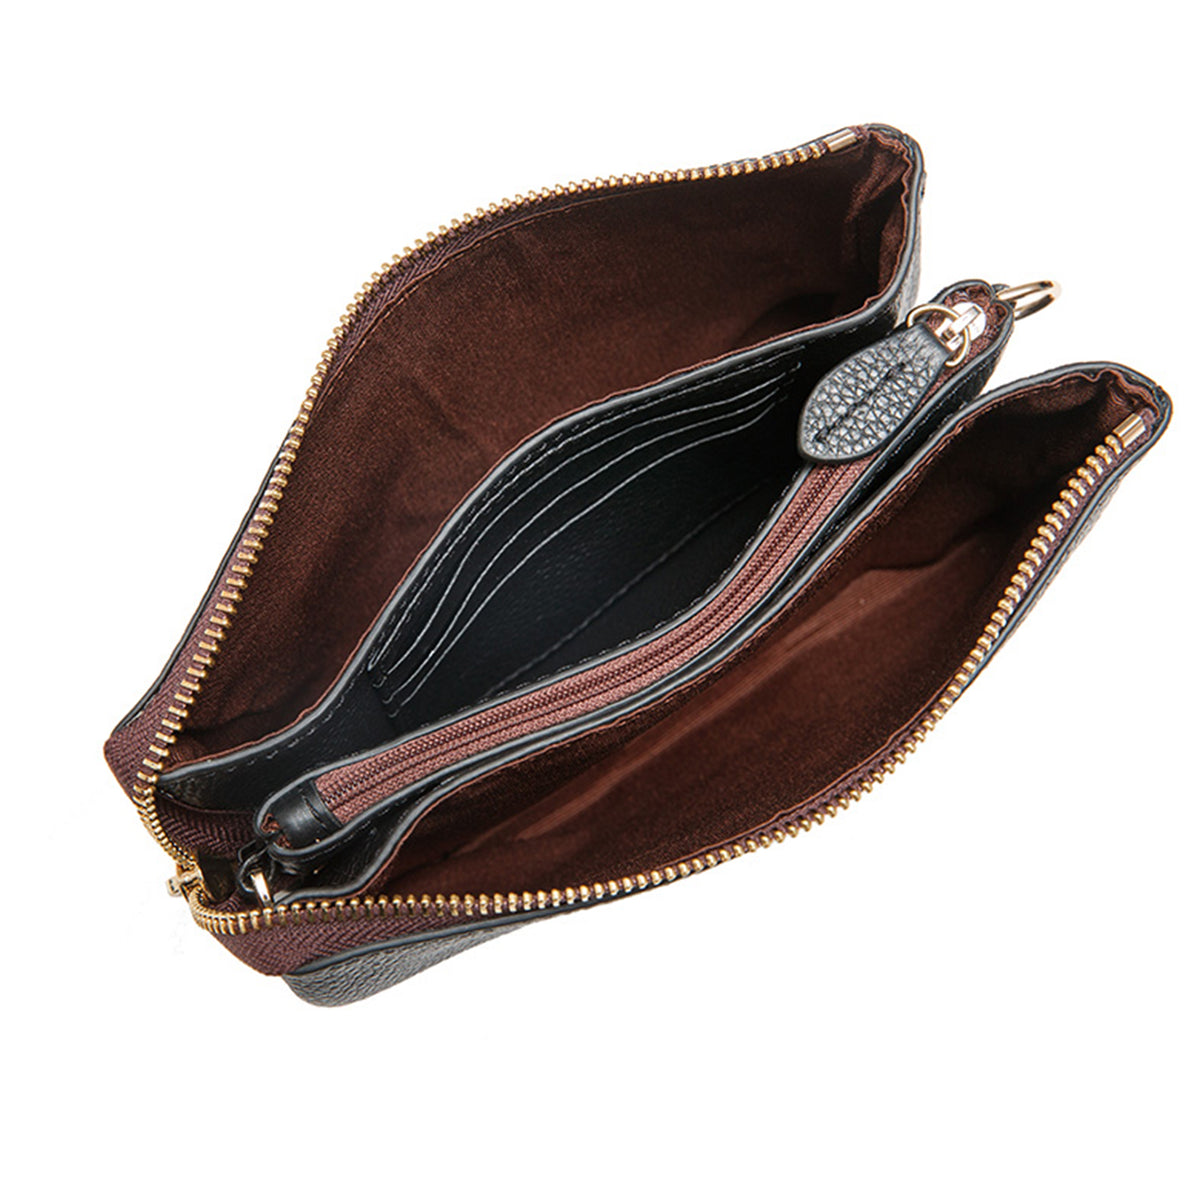 inside view of saben tilly bag with card slots